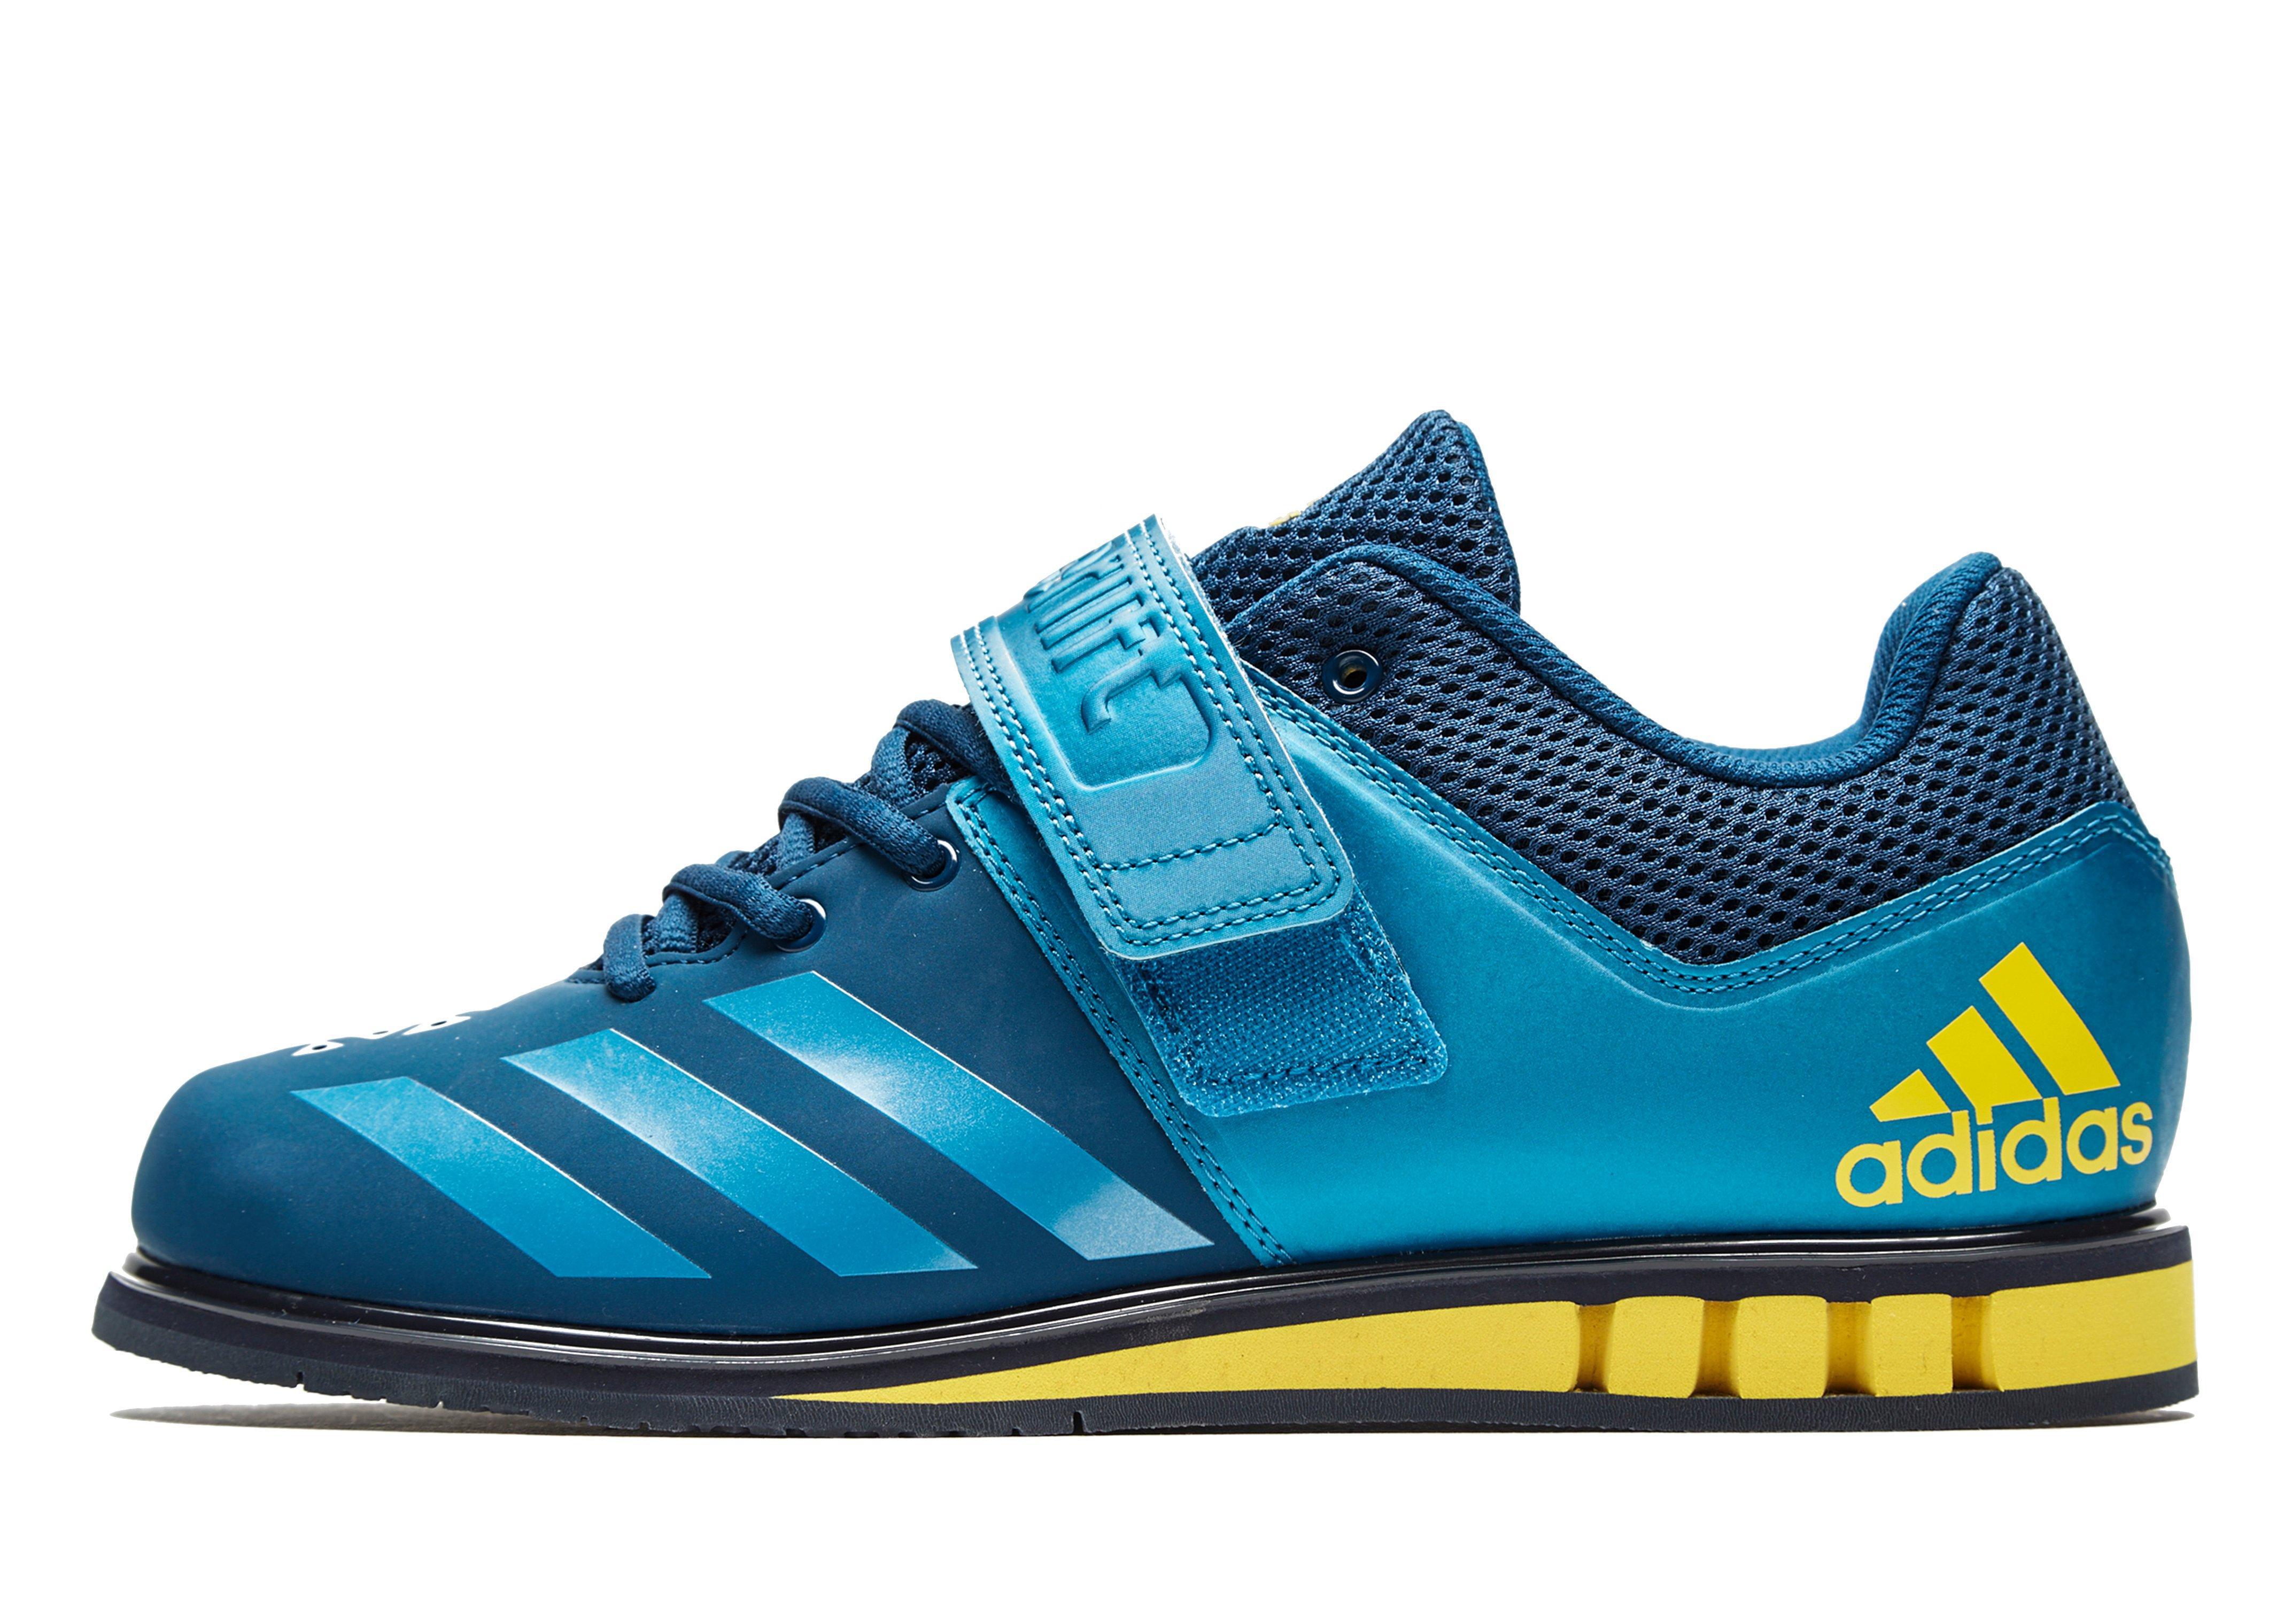 adidas Synthetic Powerlift 3.1 Weightlifting Shoes in Blue for Men - Lyst